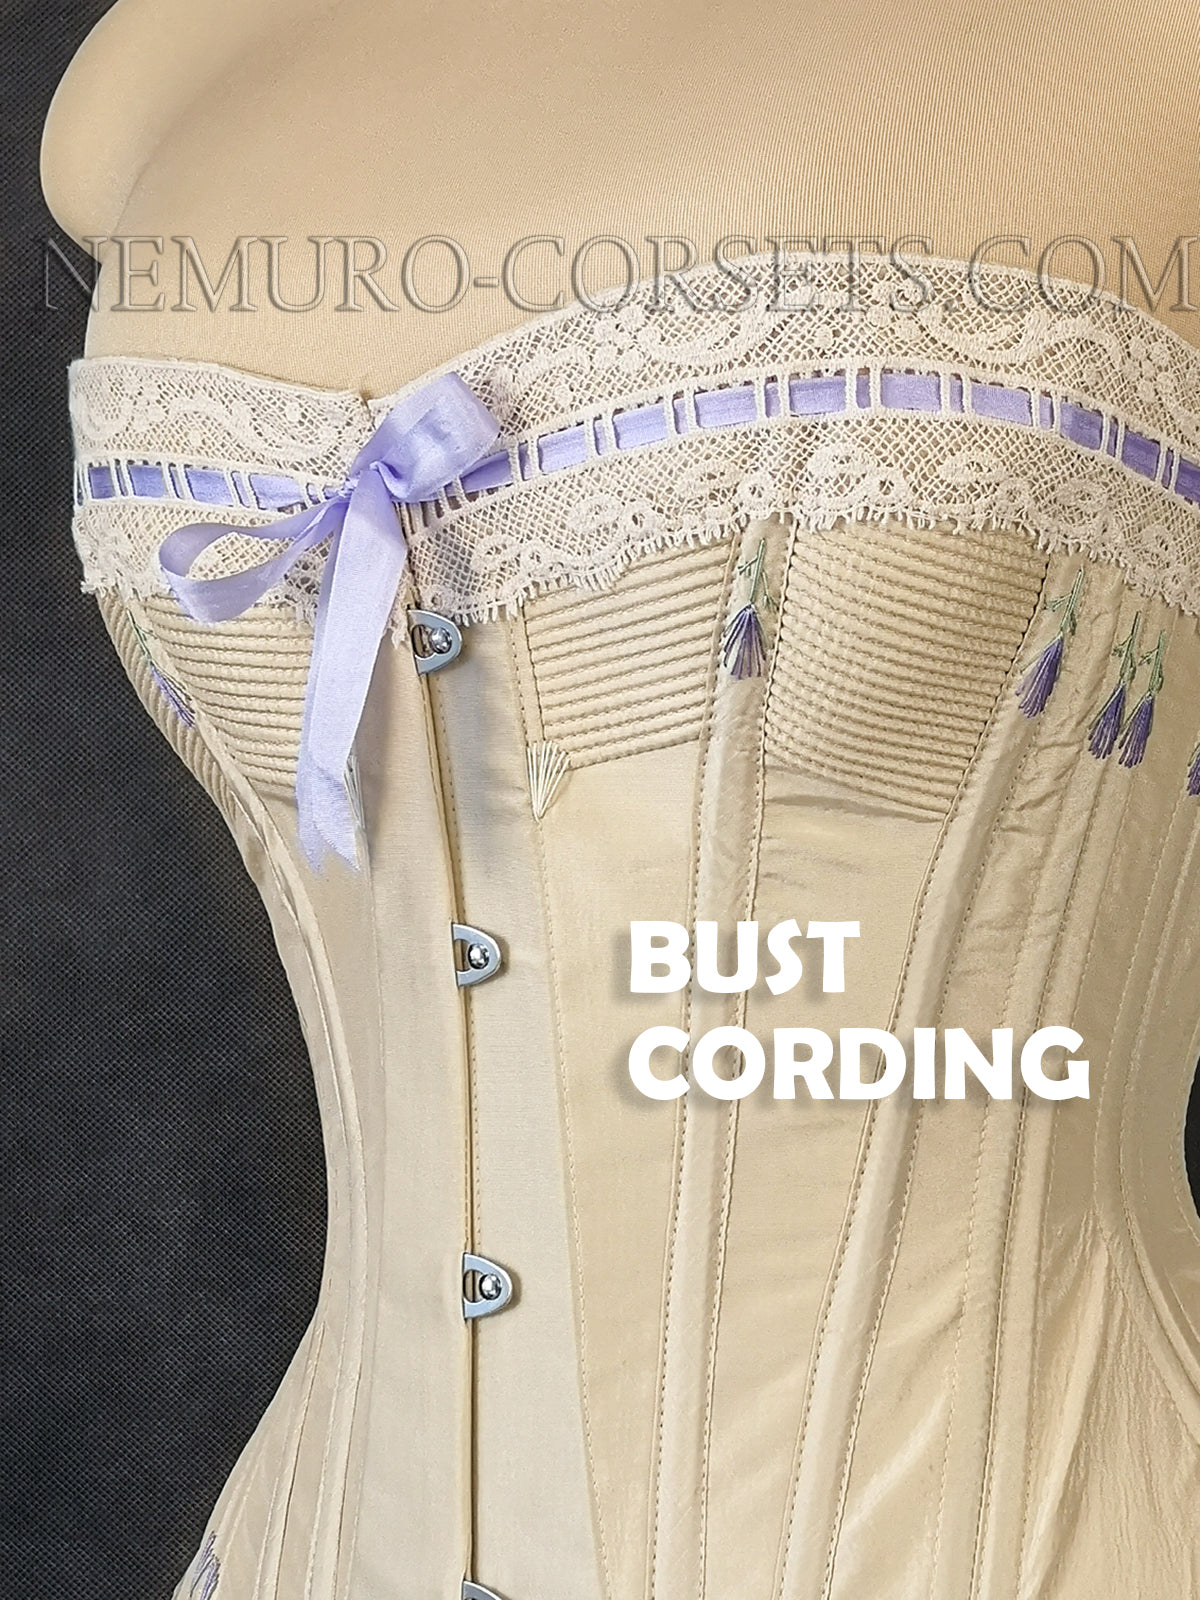 1891 CORSET FOR ELDERLY LADY - MULTI-SIZE 31-47 BUST 20-36